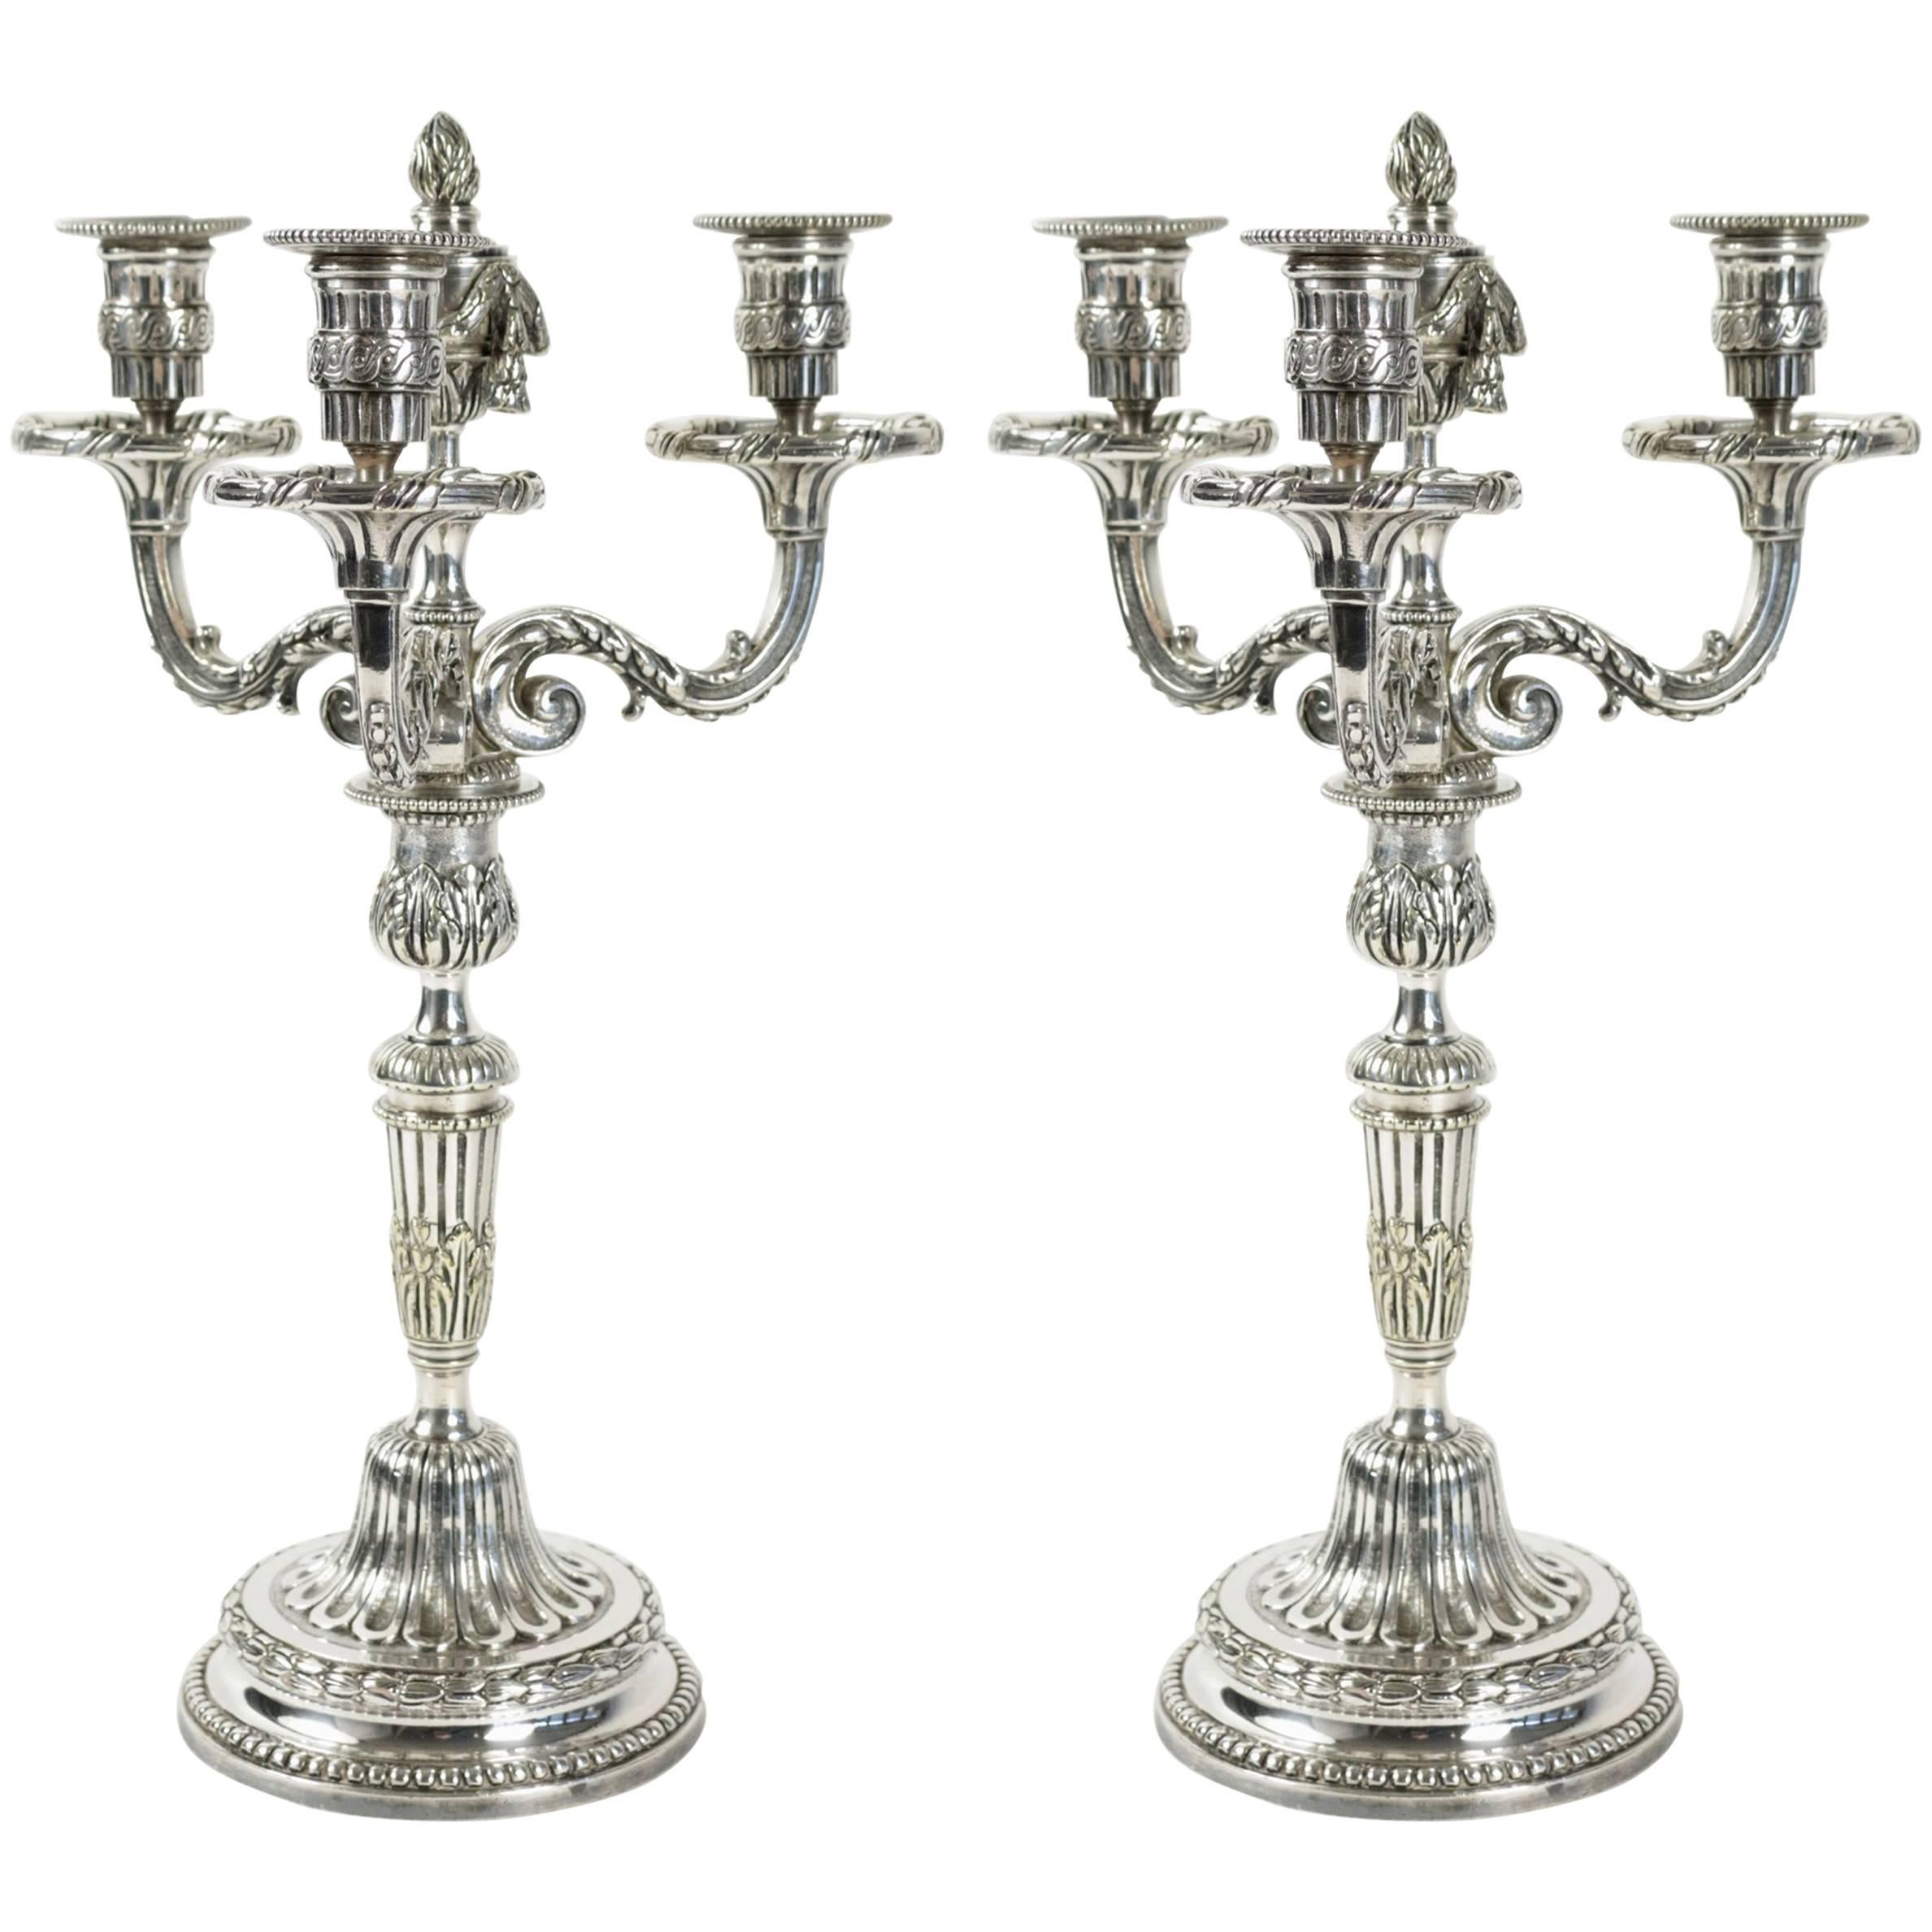 Pair of Candelabras For Sale